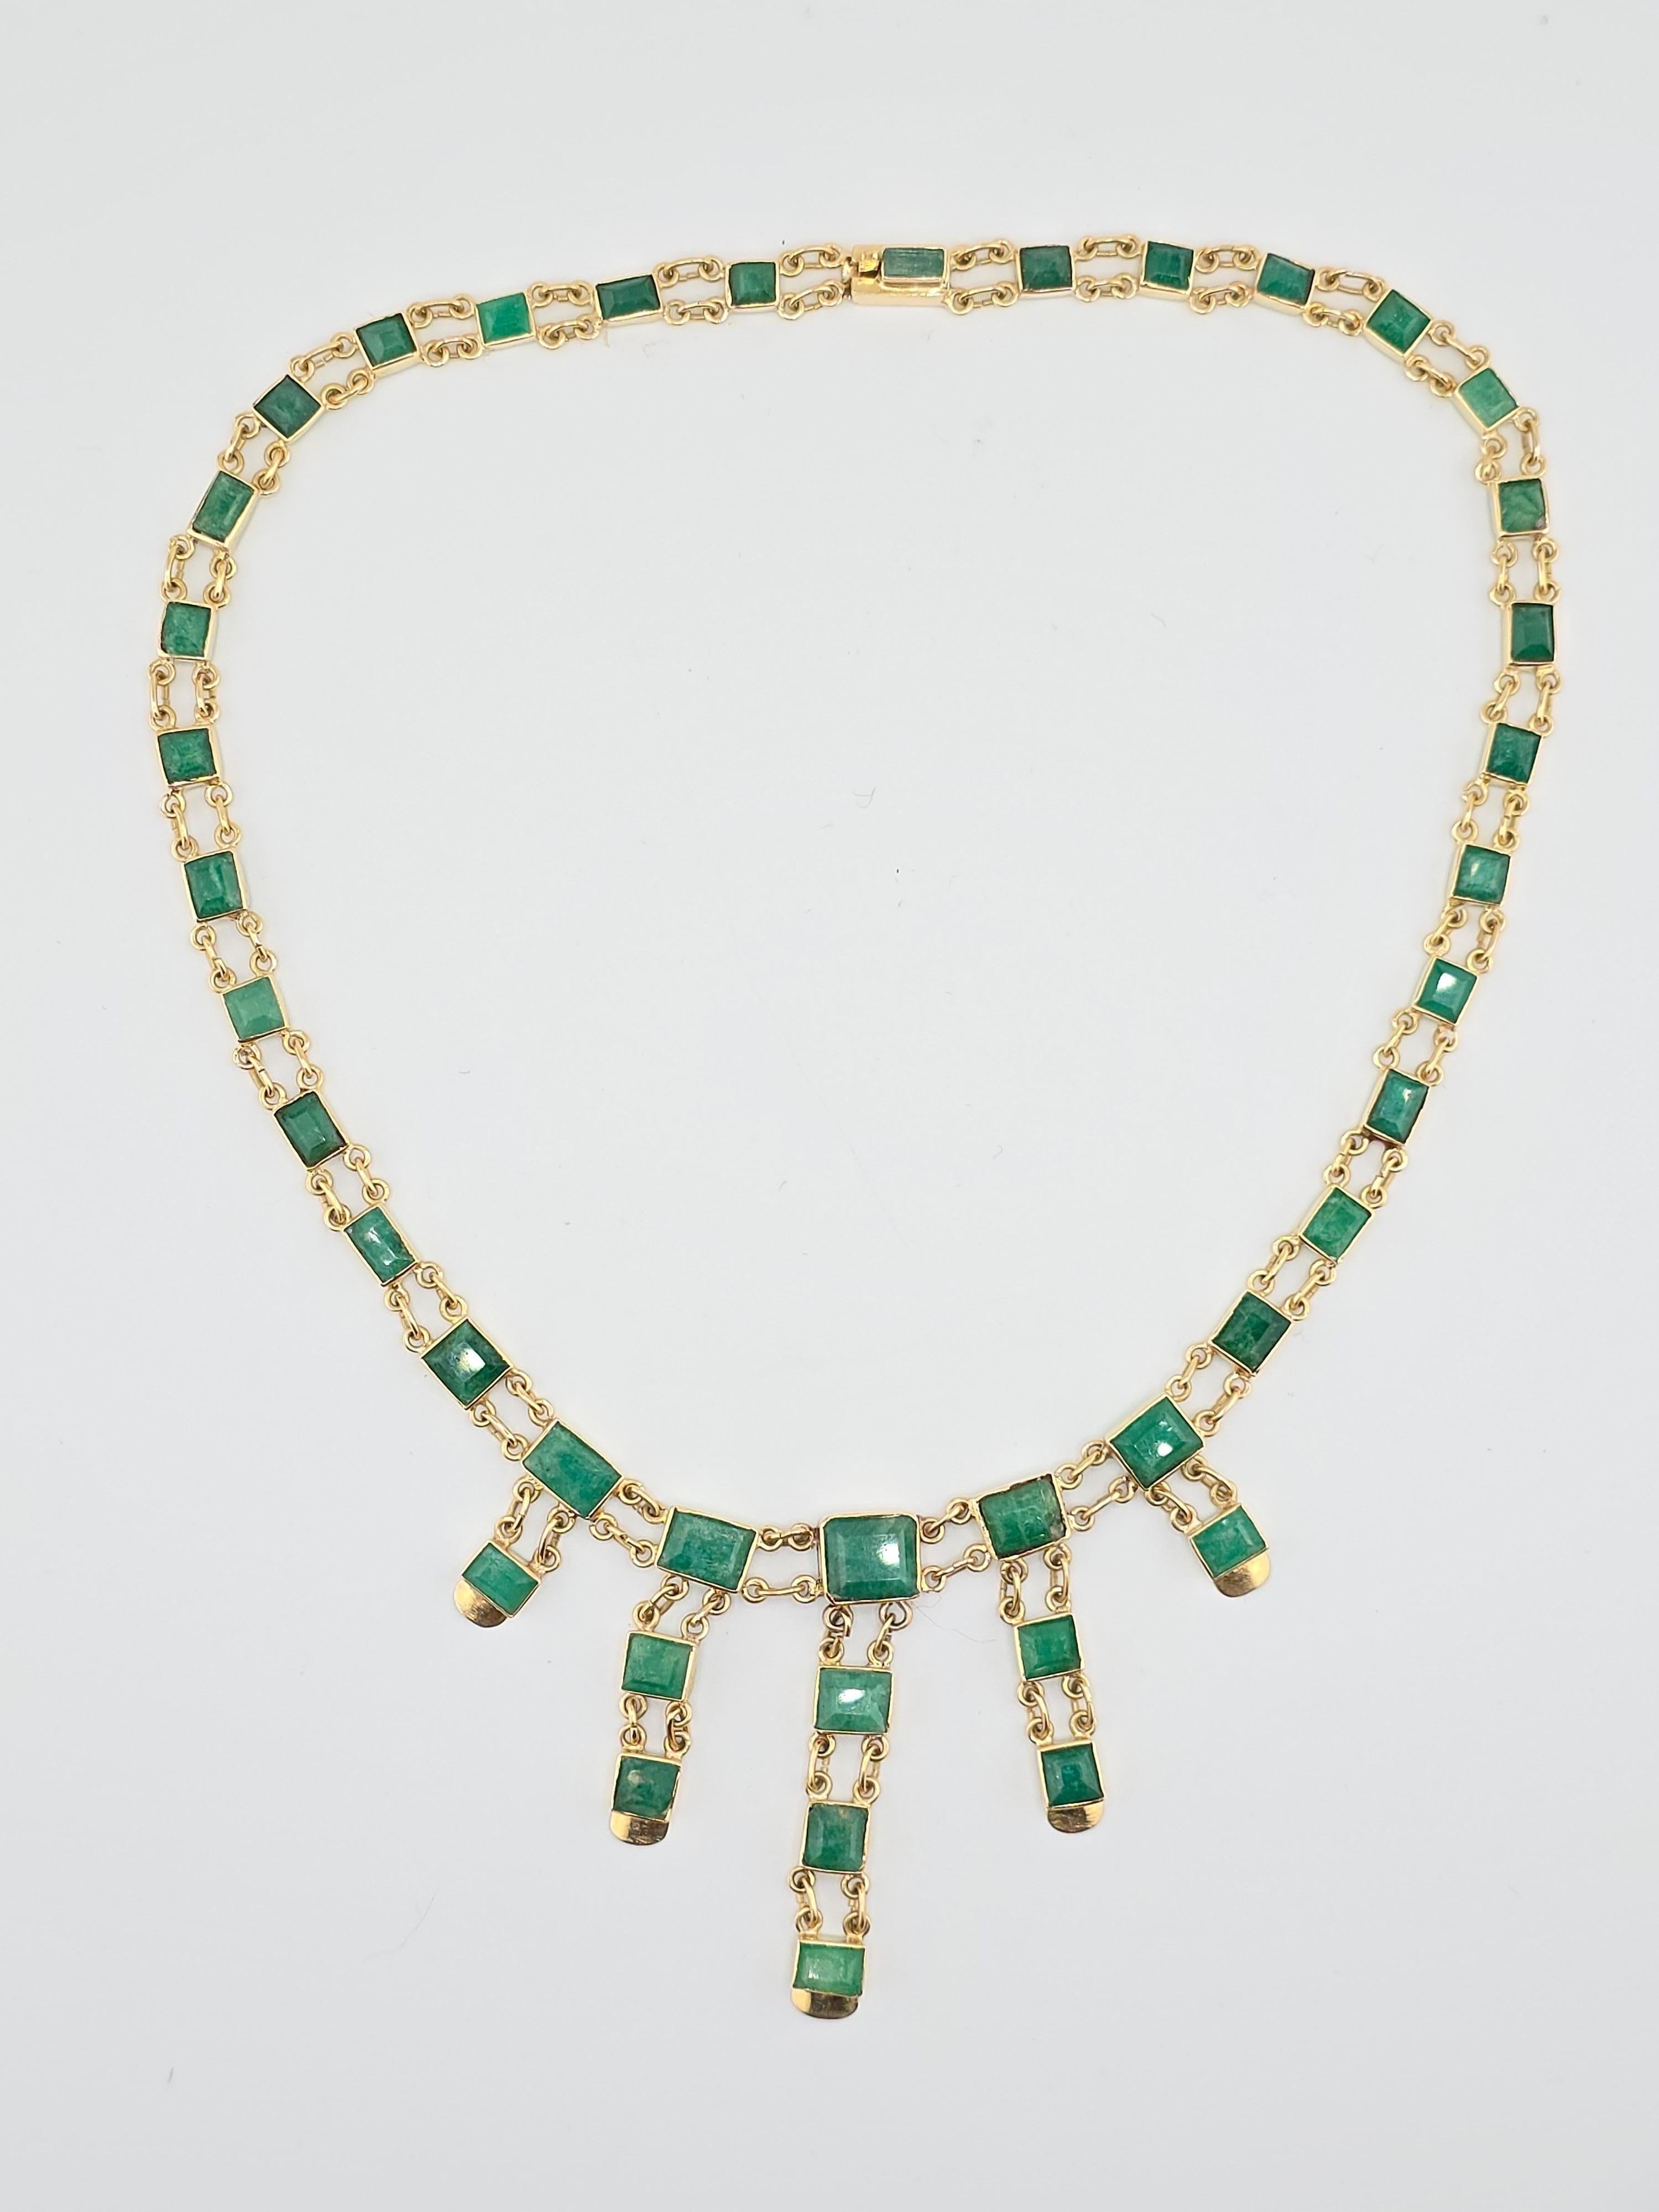 This is an exceptional large 14 karat yellow gold and emerald necklace. The colors on the emerald are vivid, green with different shades some lighter some darker. The total amount of carats easily exceed well over 20 carats but not sure of the exact